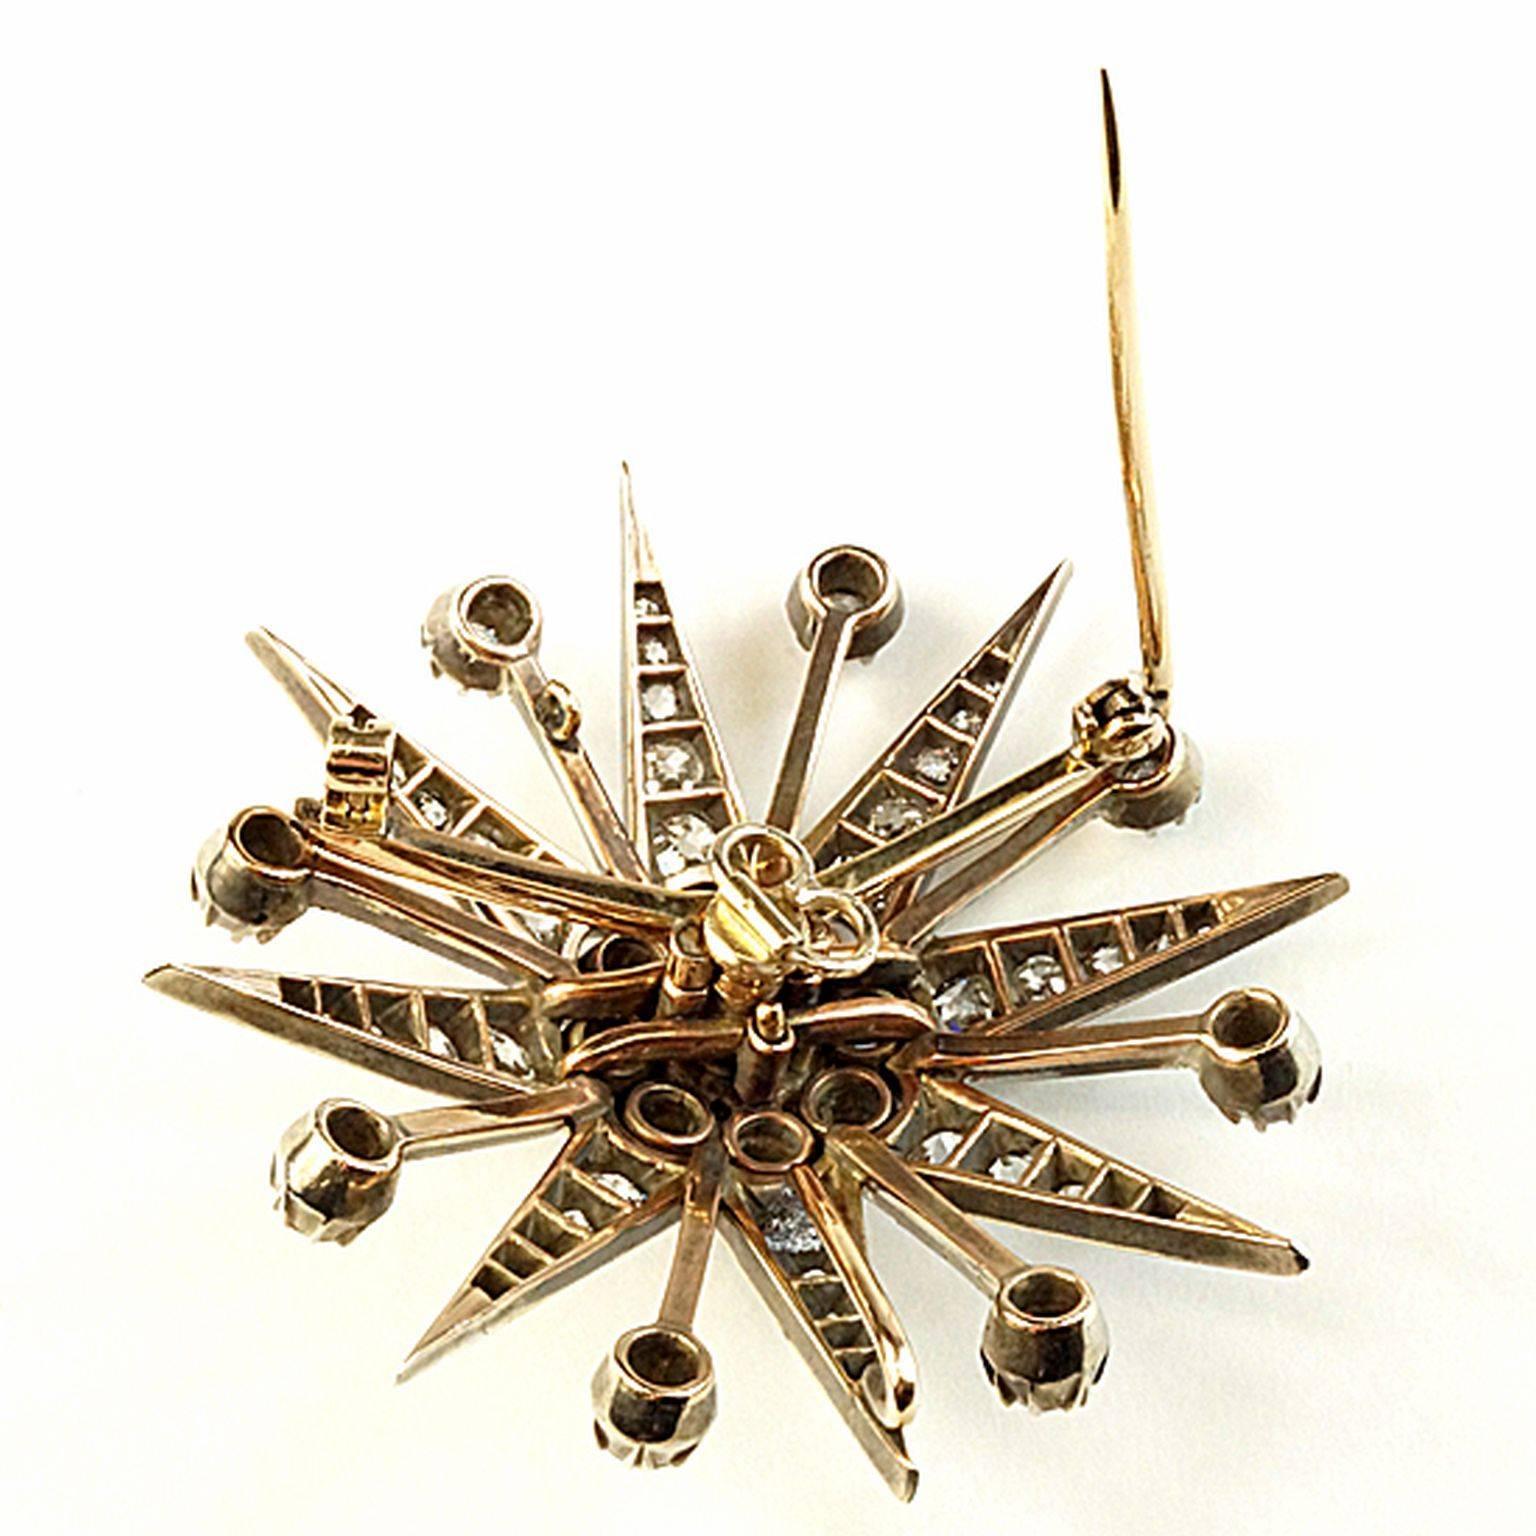 C. 1910 starburst brooch. Sterling silver front with rose gold back removable pin
so it can also be worn as a pendant.
Approximately 5.25 ct. Old European cut diamonds.
Measures 1 3/4 in. (4.4 cm) in length and width.
